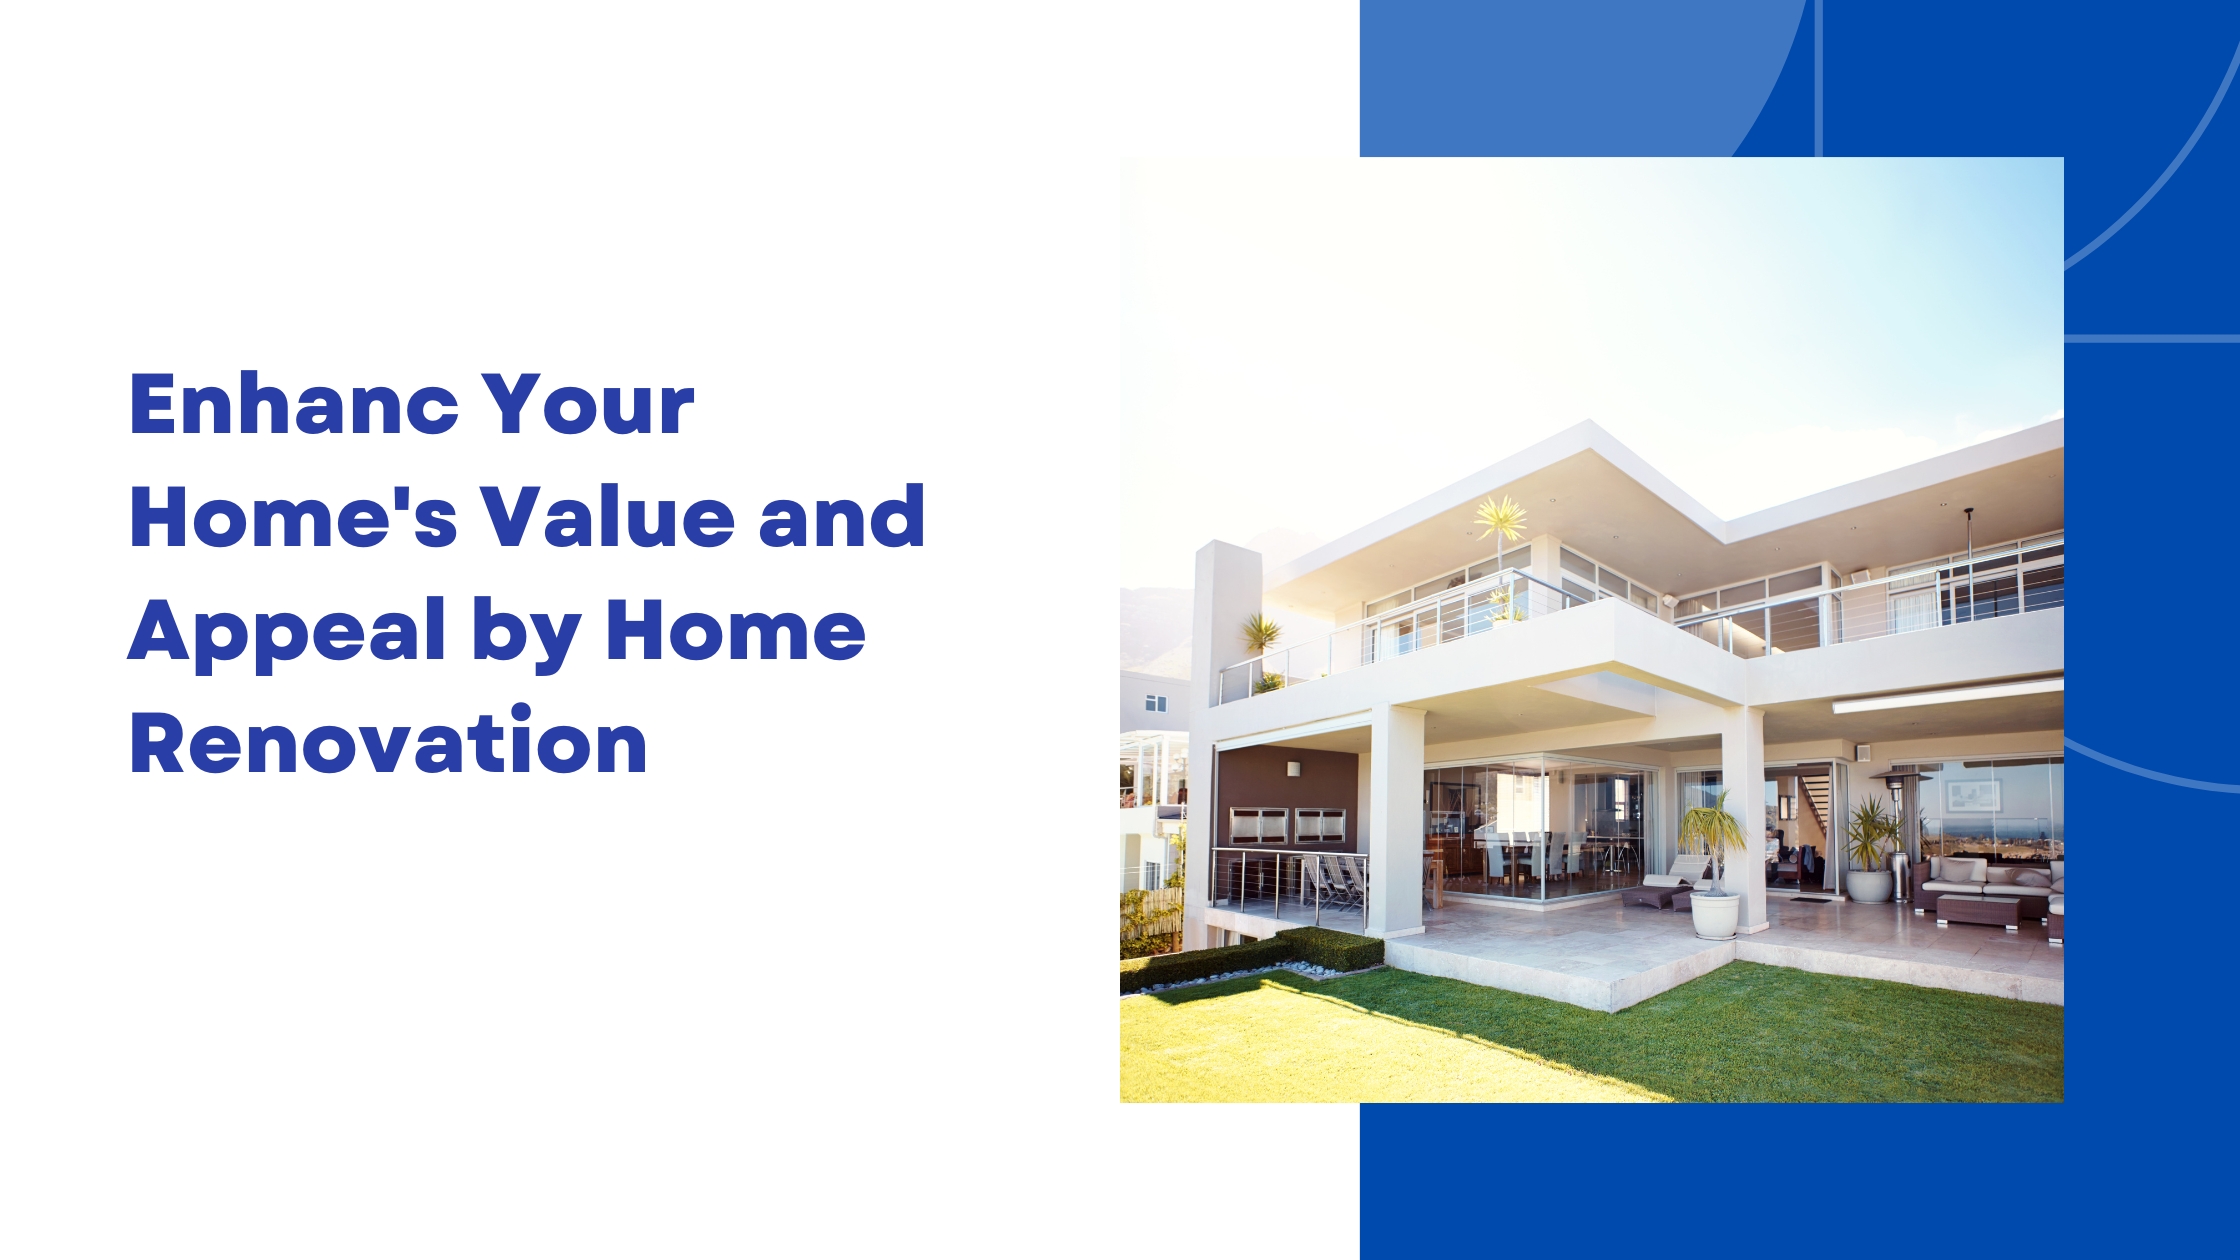 Enhanc Your Home’s Value and Appeal by Home Renovation